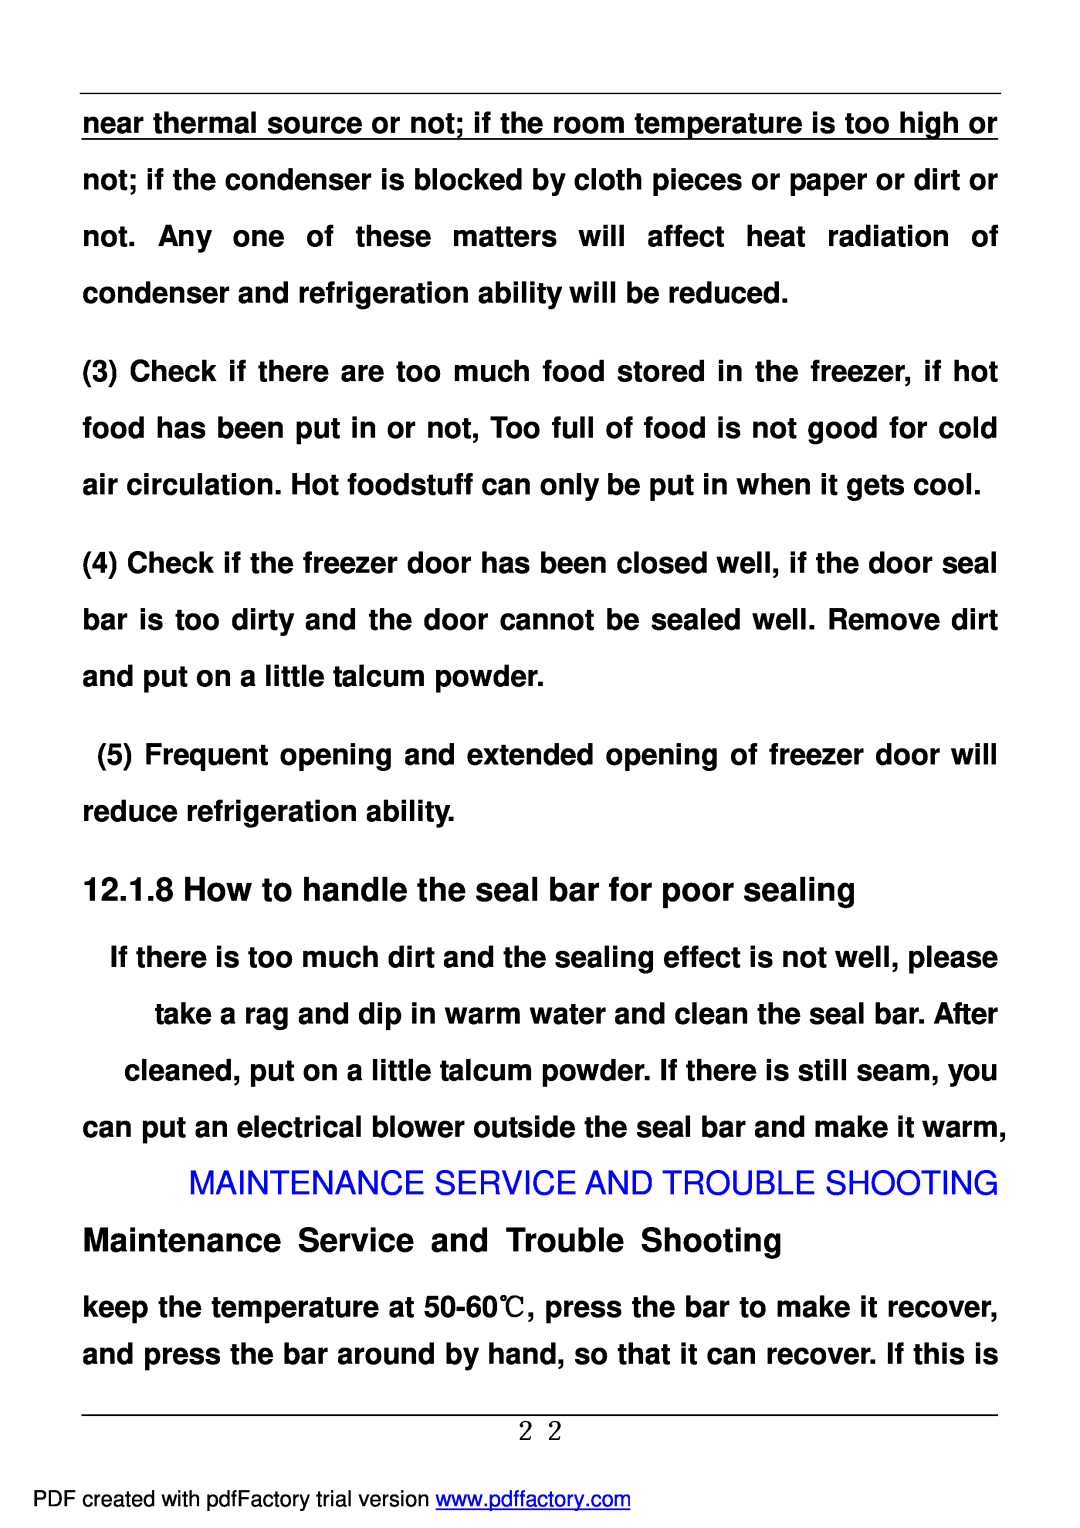 Haier BD-478A service manual How to handle the seal bar for poor sealing, Maintenance Service And Trouble Shooting 